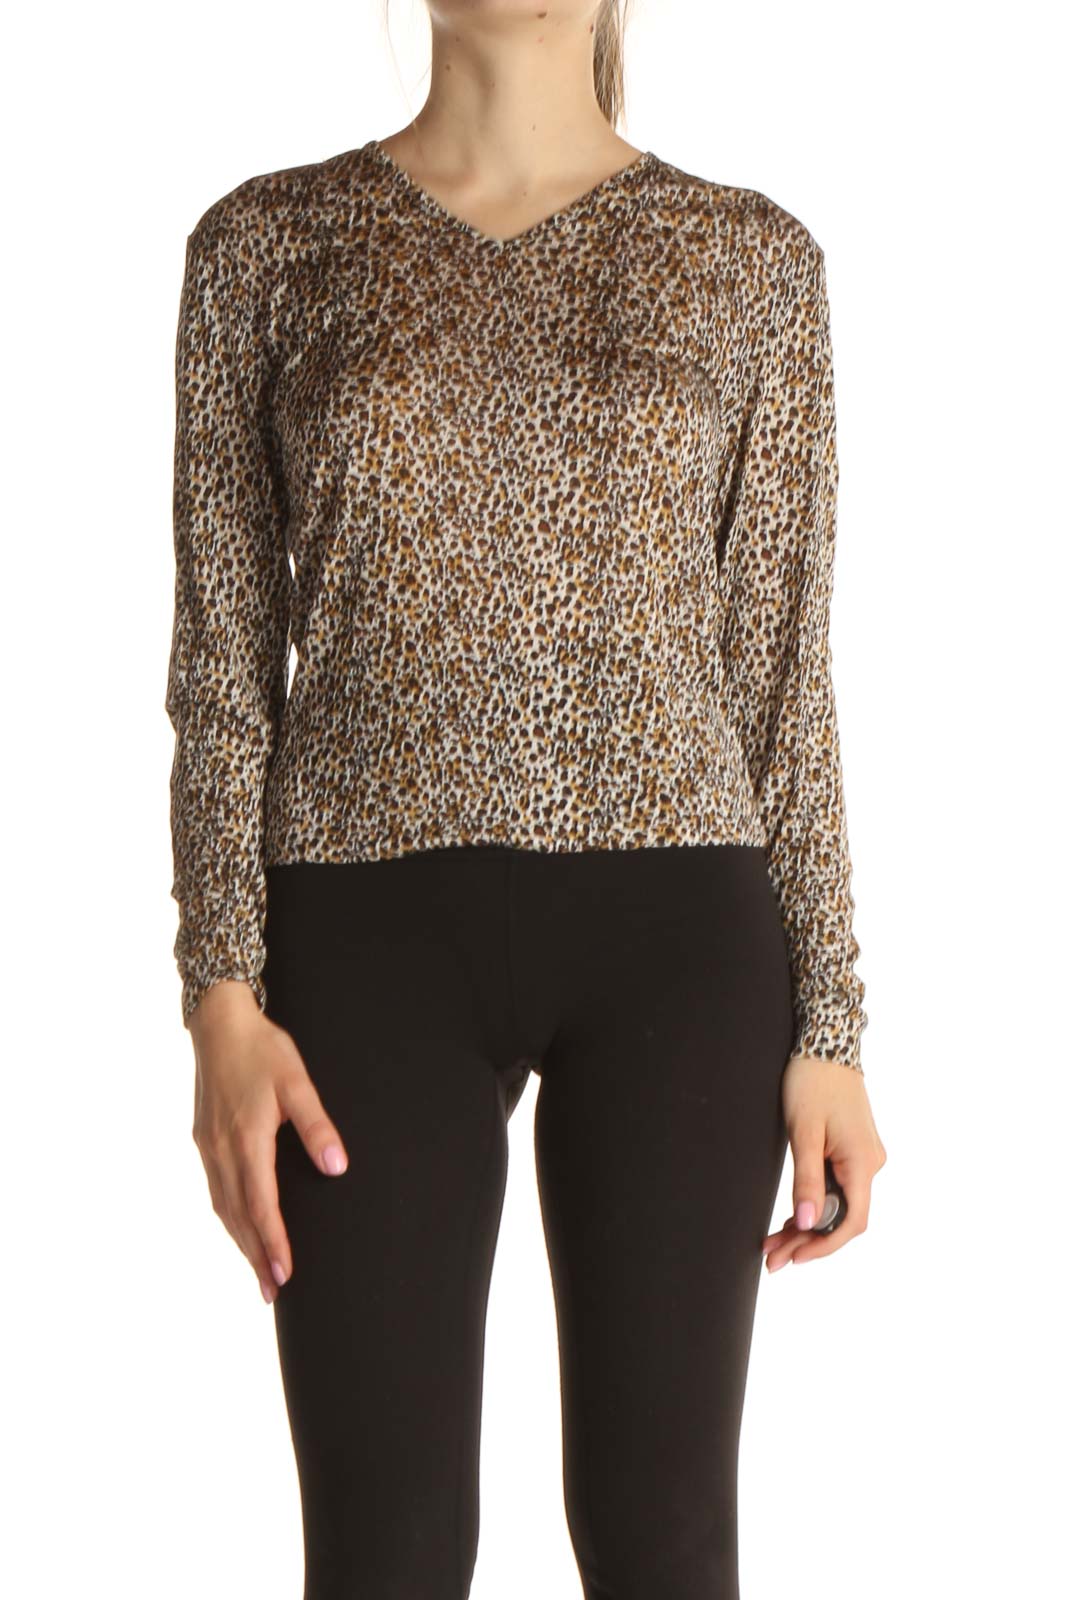 Brown Animal Print All Day Wear Silk Shirt Front